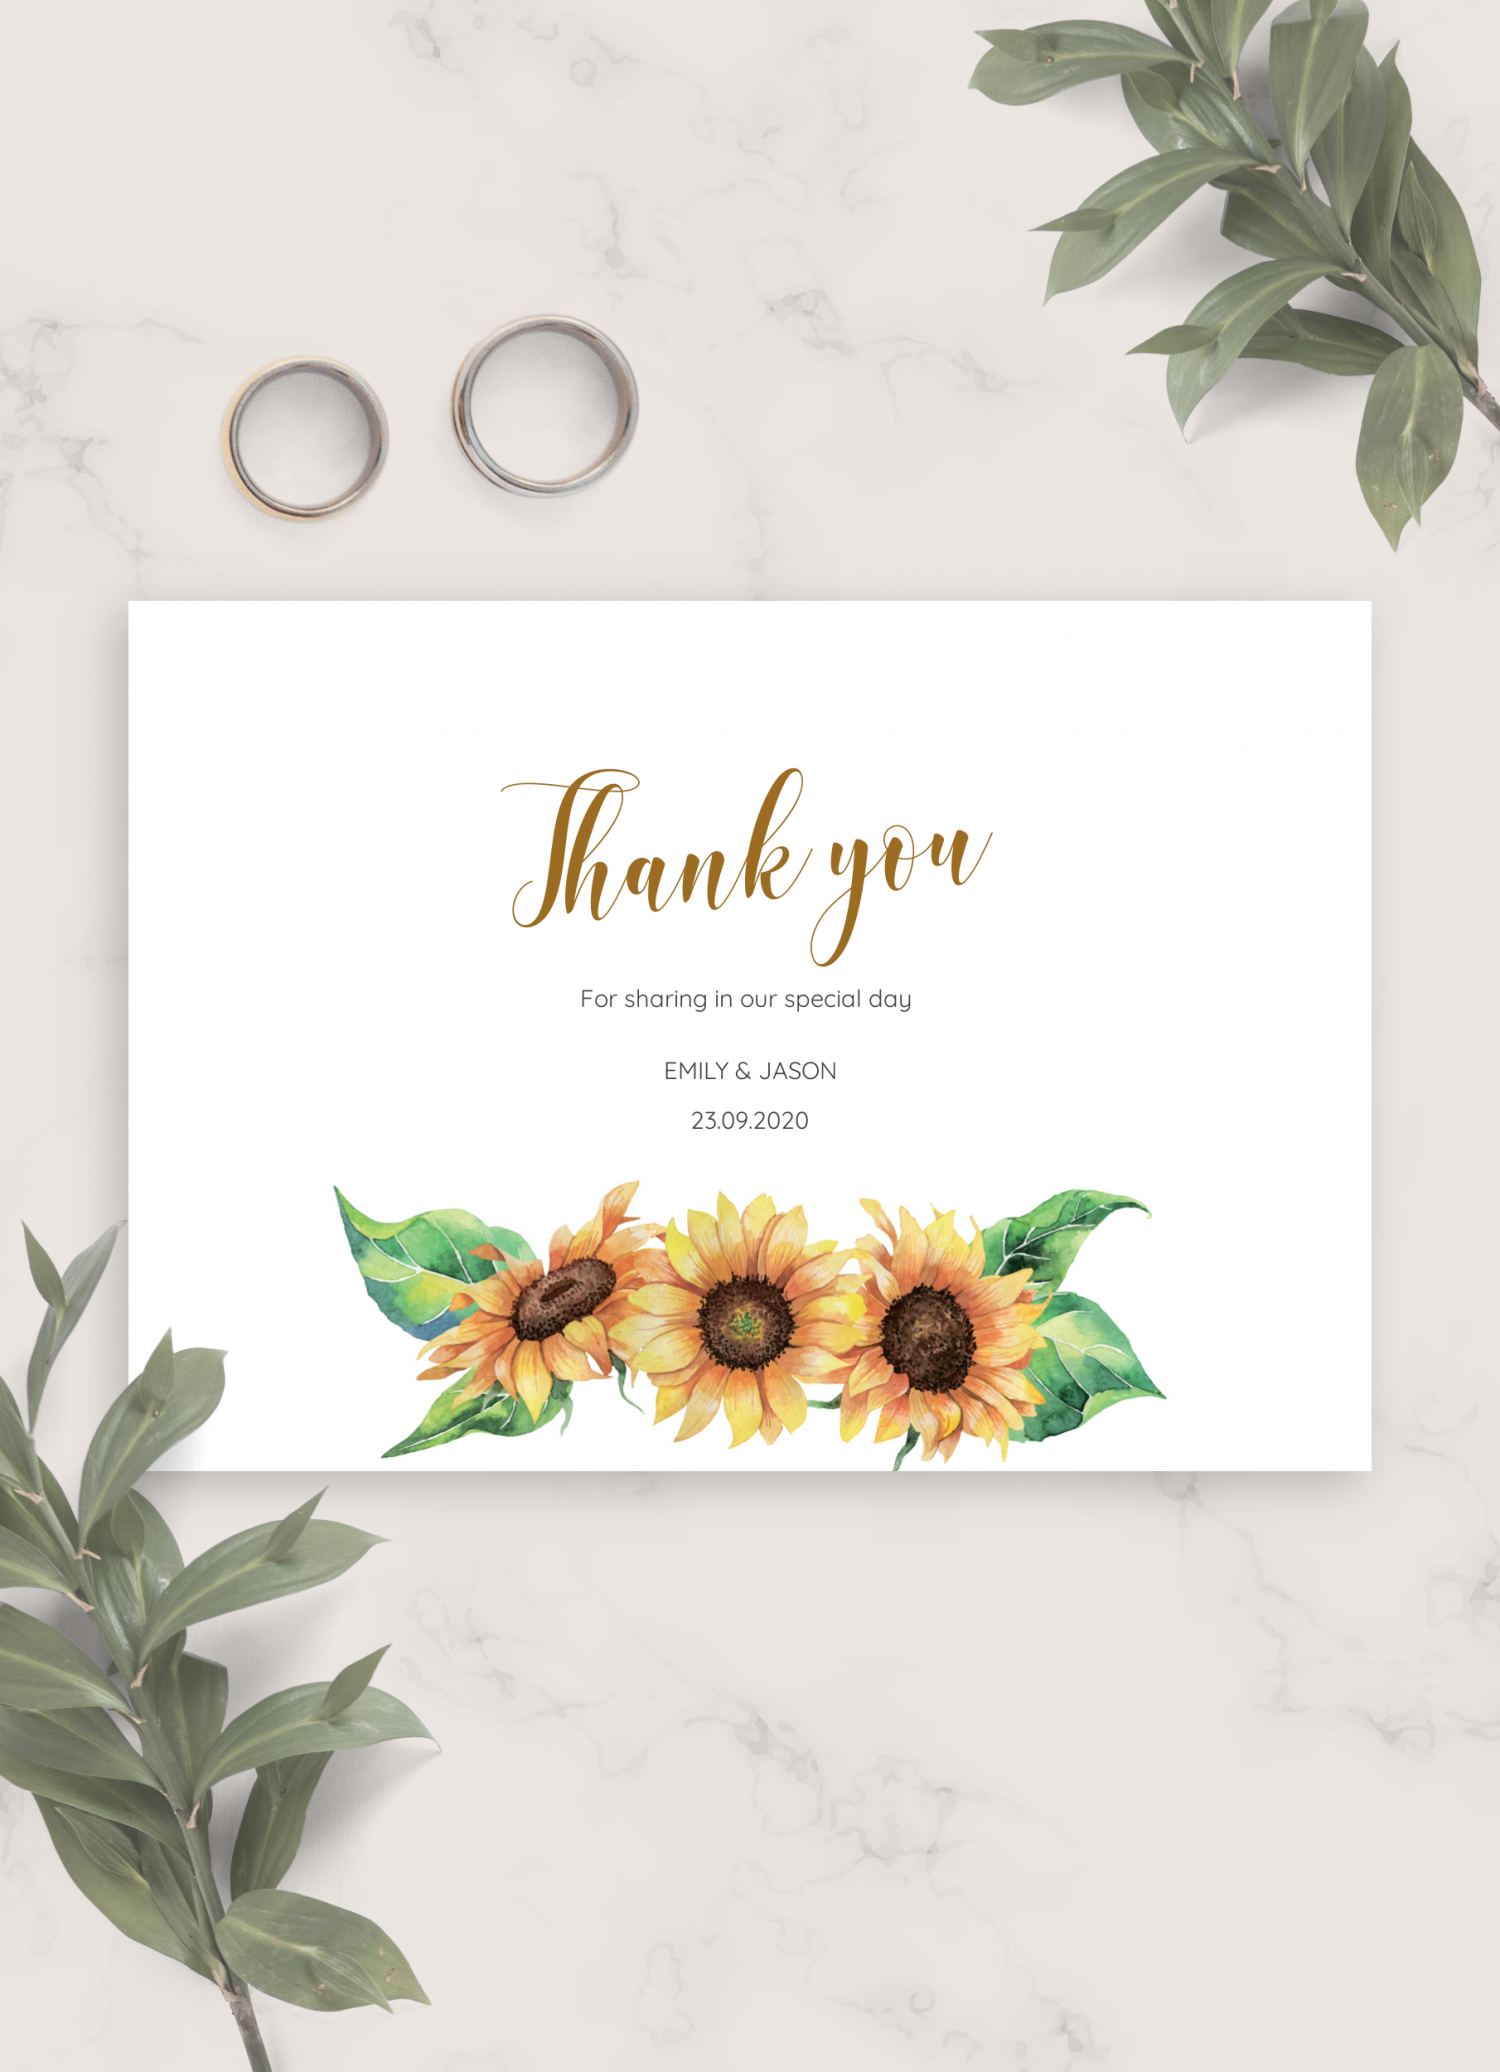 Vintage Sunflower Formal Personalized Wedding Thank You Cards 